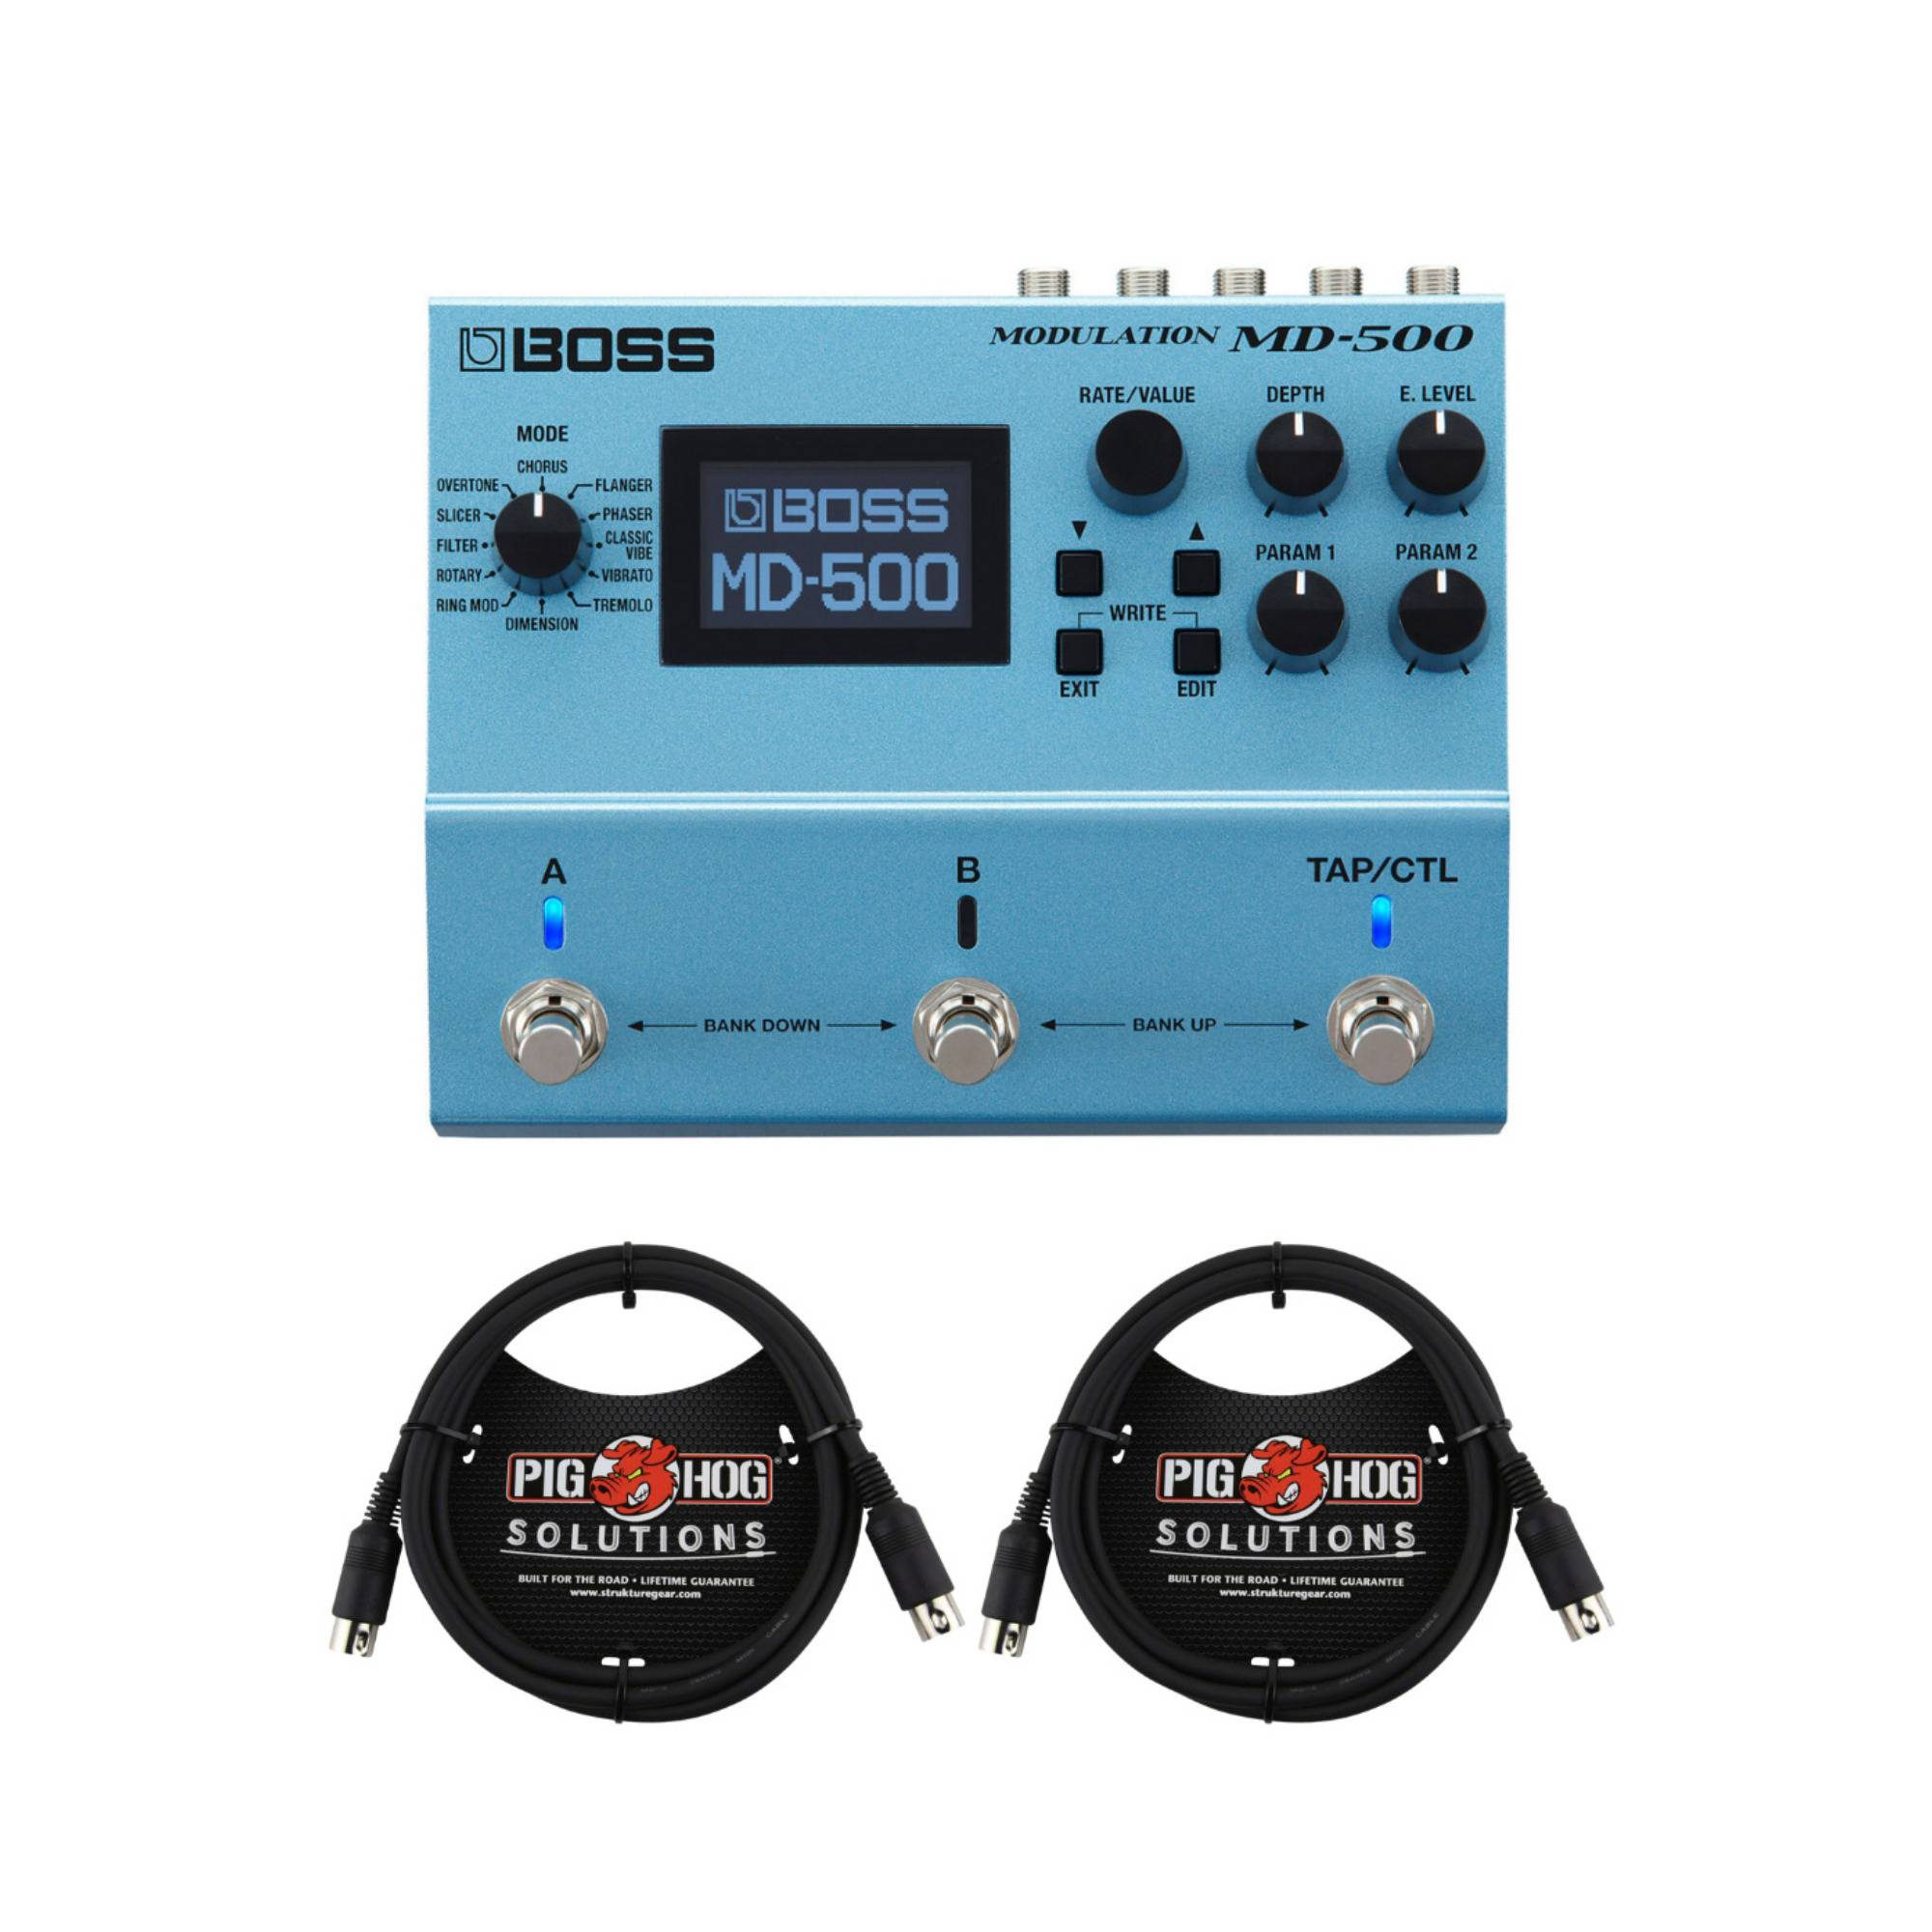 Boss MD-500 Modulation Pedal with 12 Modes and 28 Modulation Types with MIDI Cables